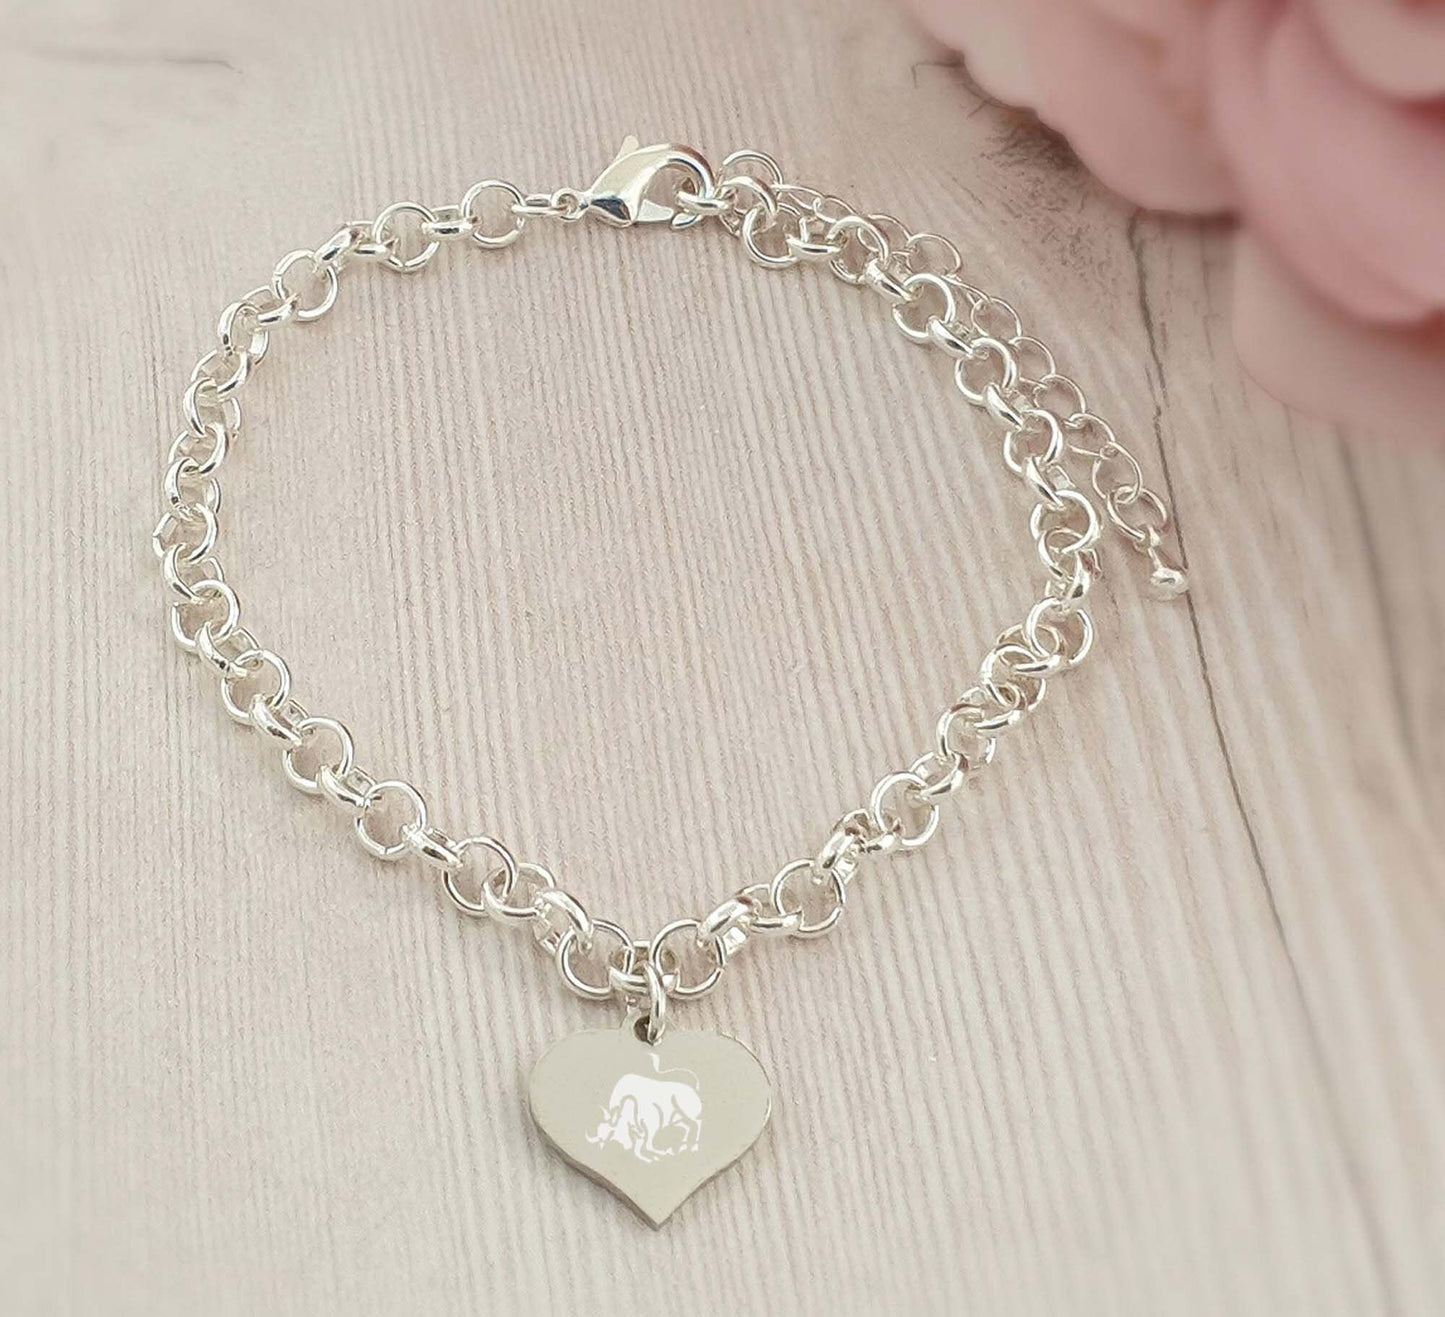 SanaBelle™ Zodiac Horoscope Birthday Personalised Engraved Name Heart Charm Link Bracelet - Available in Various Sizes